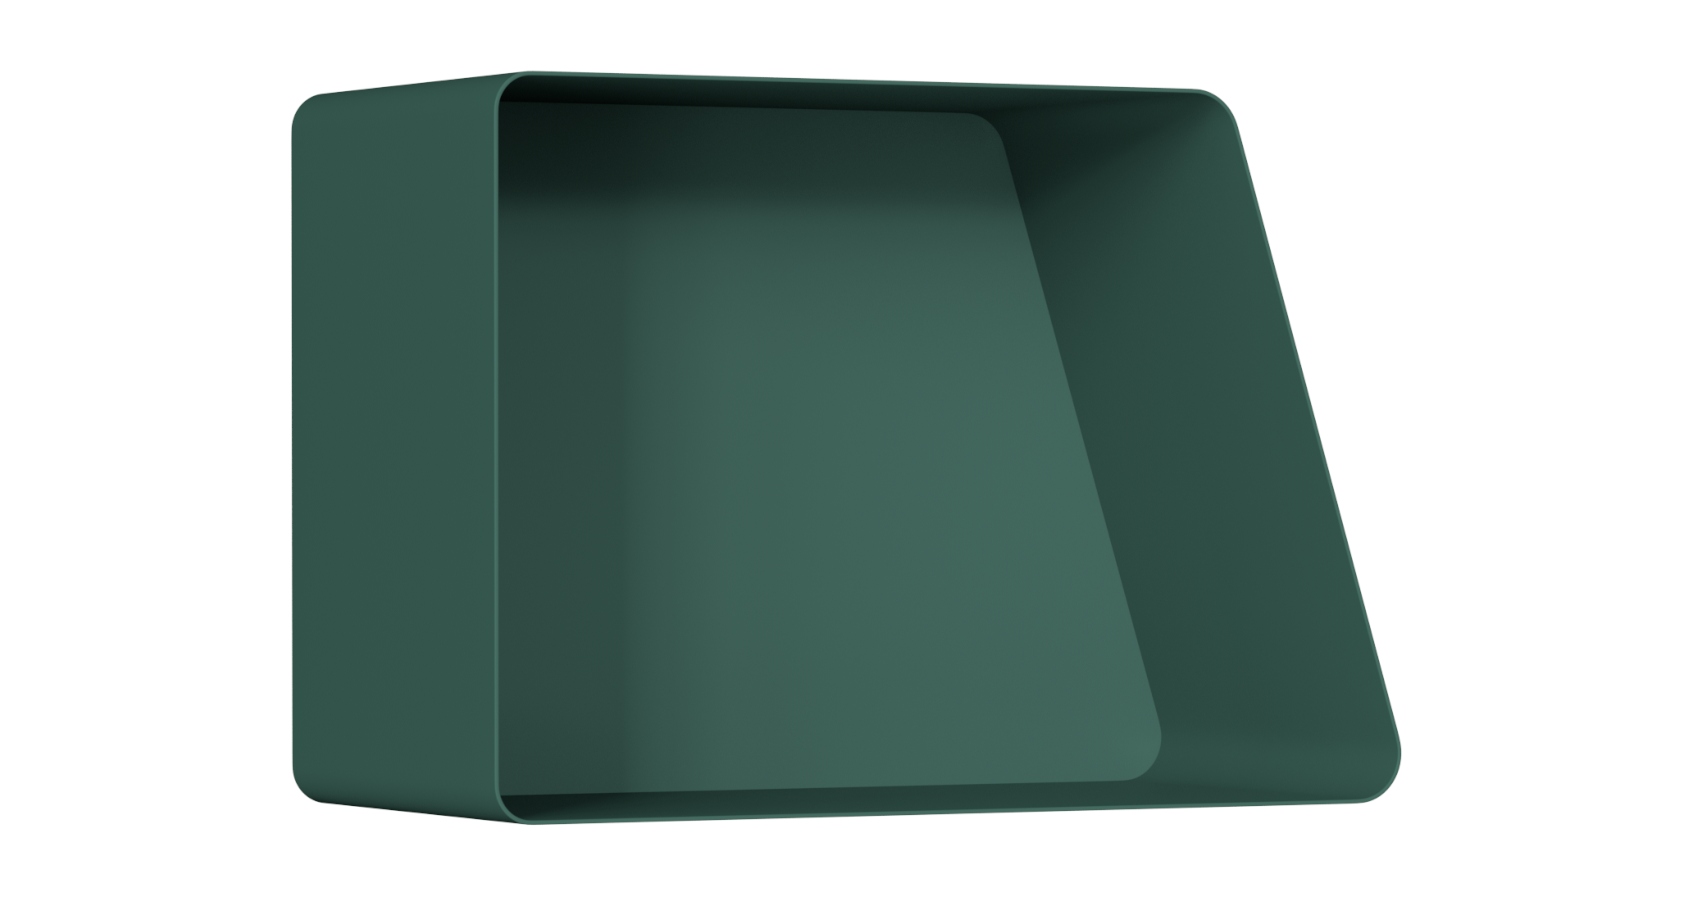 Pixa Wall Mounted closed shelf in green in front view